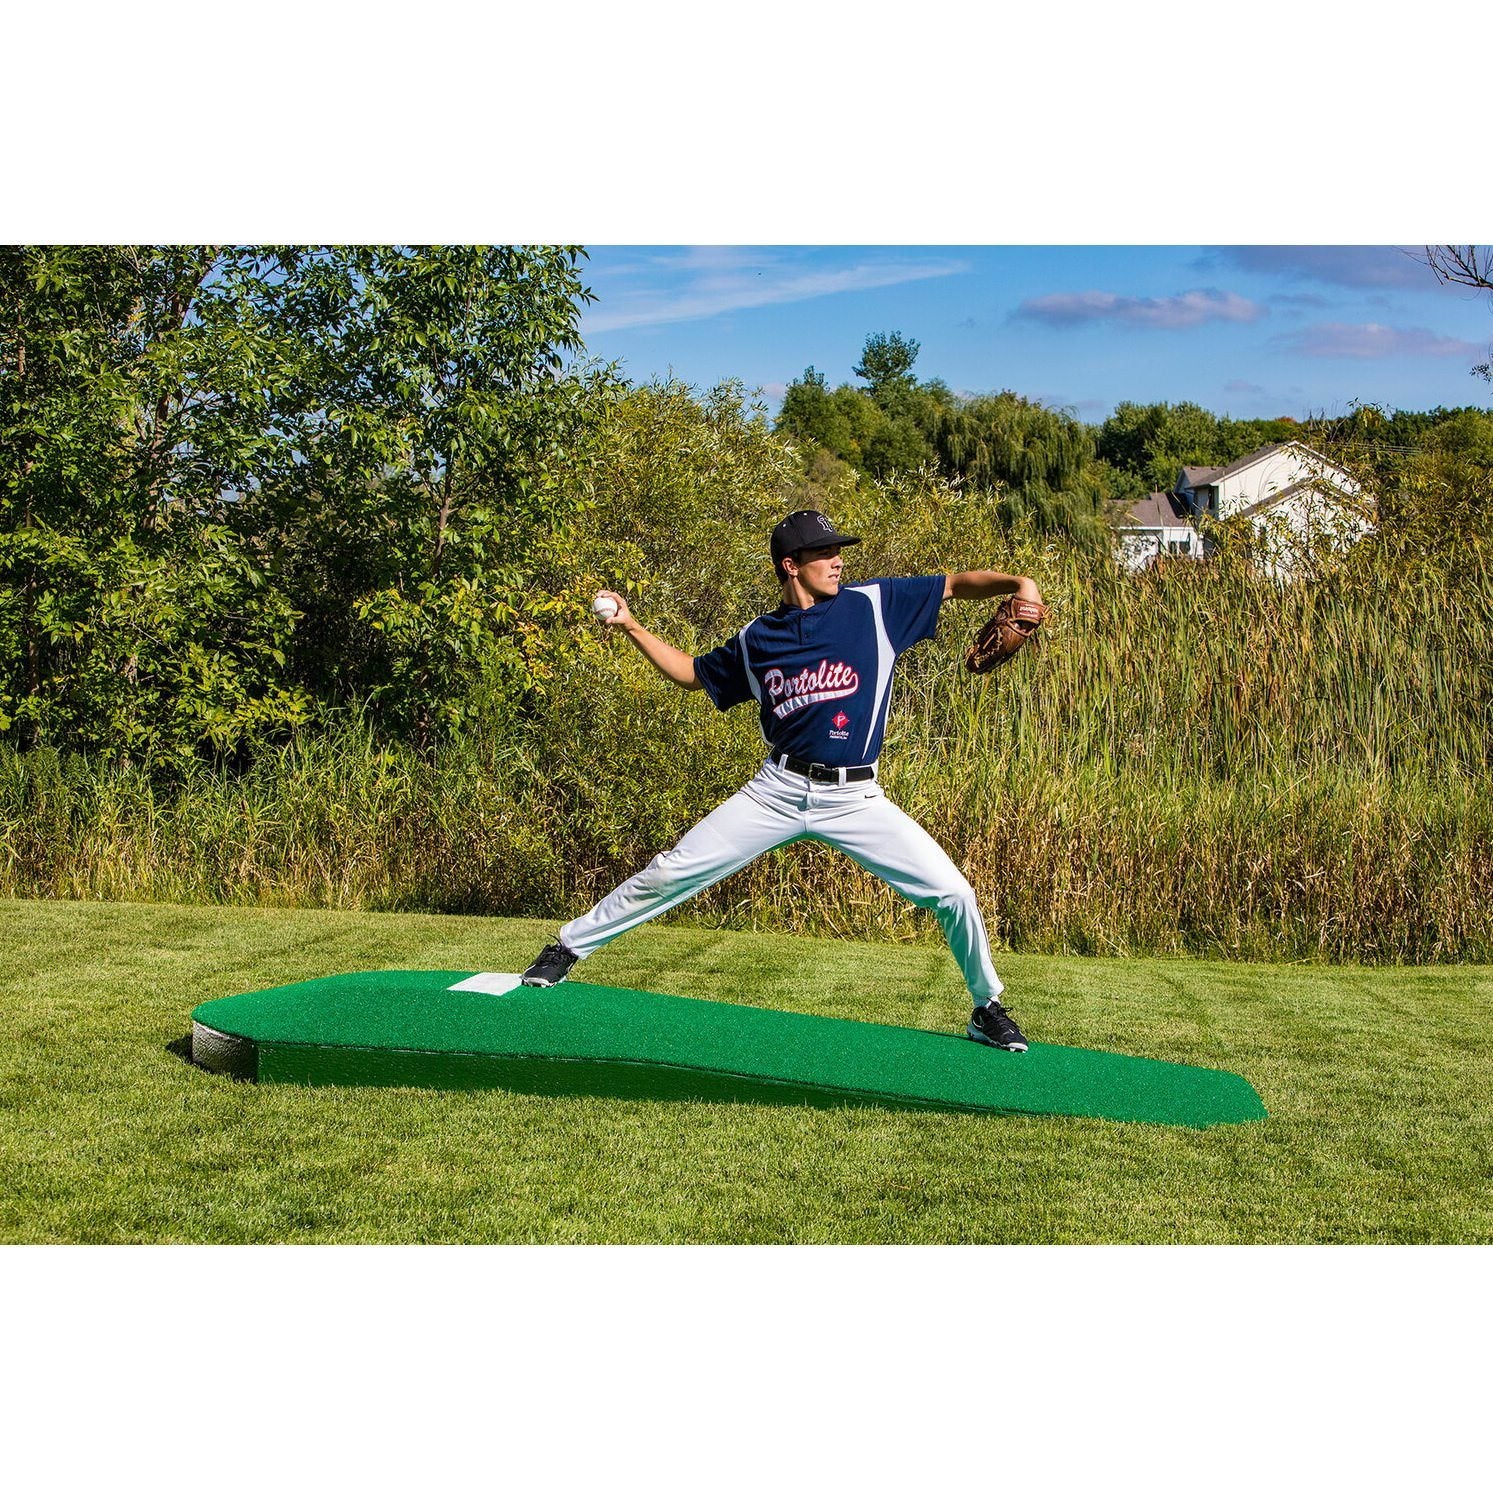 Portolite 10" Portable Practice Pitching Mound green side view pitching stride